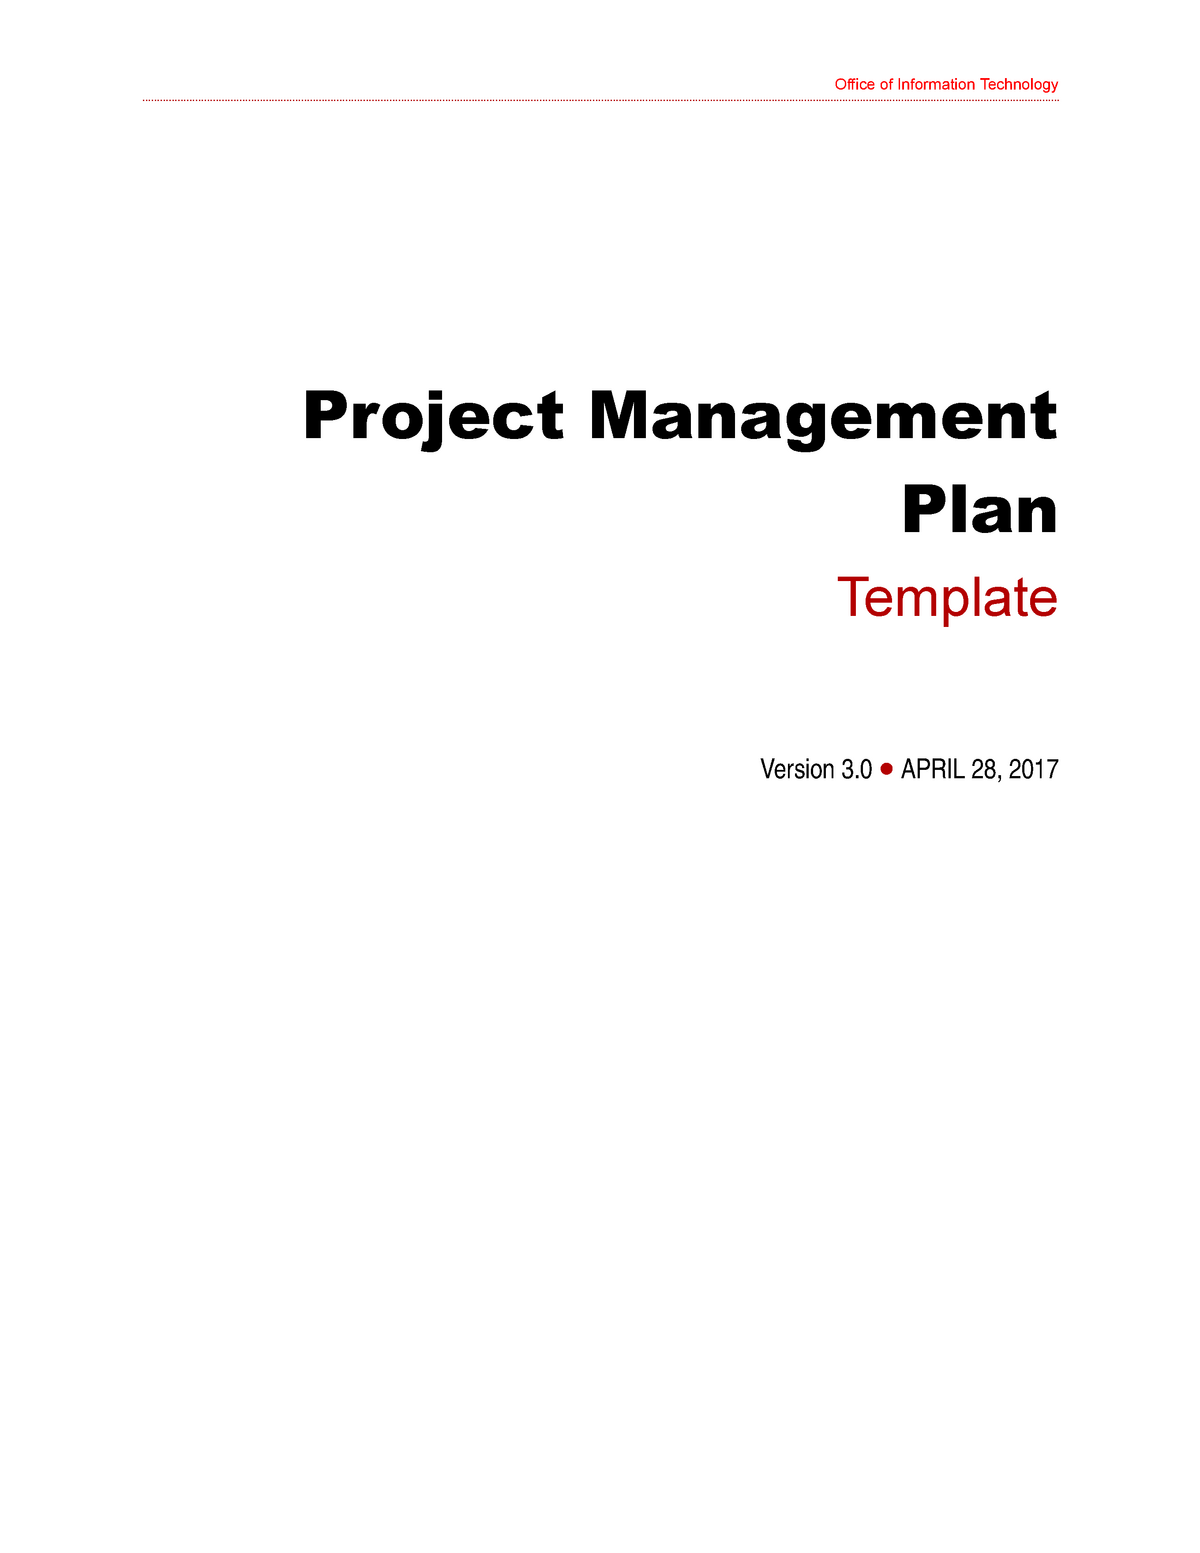 Project-Management-Plan - Office of Information Technology Project ...